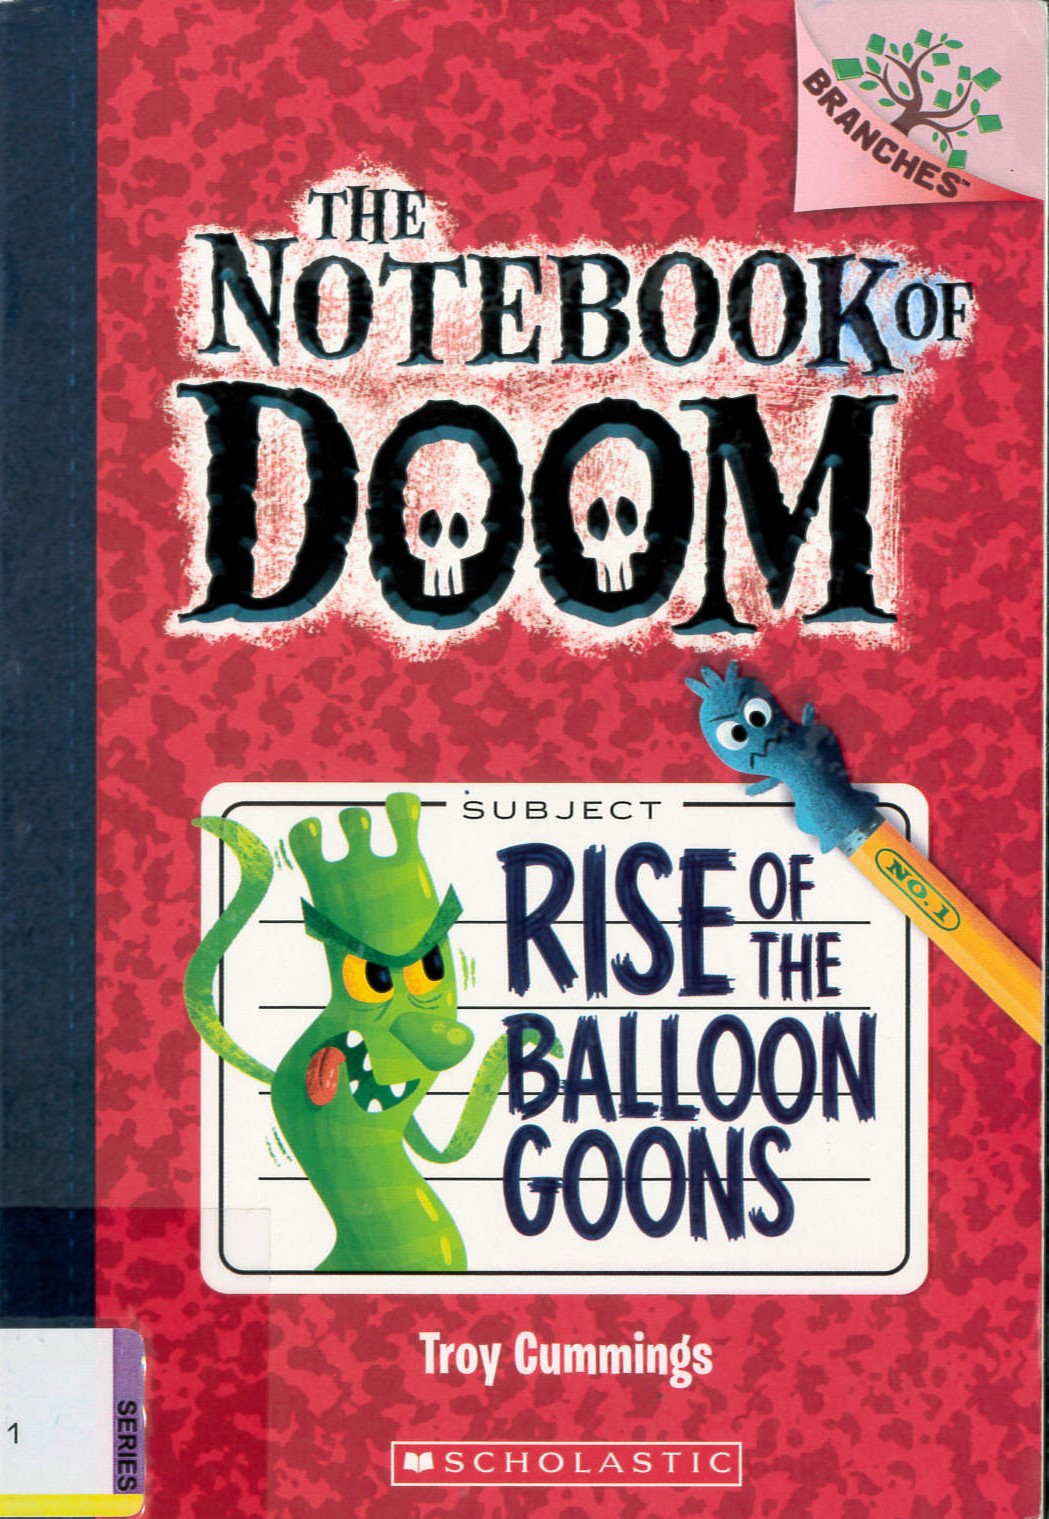 The notebook of doom : rise of the balloon goons /